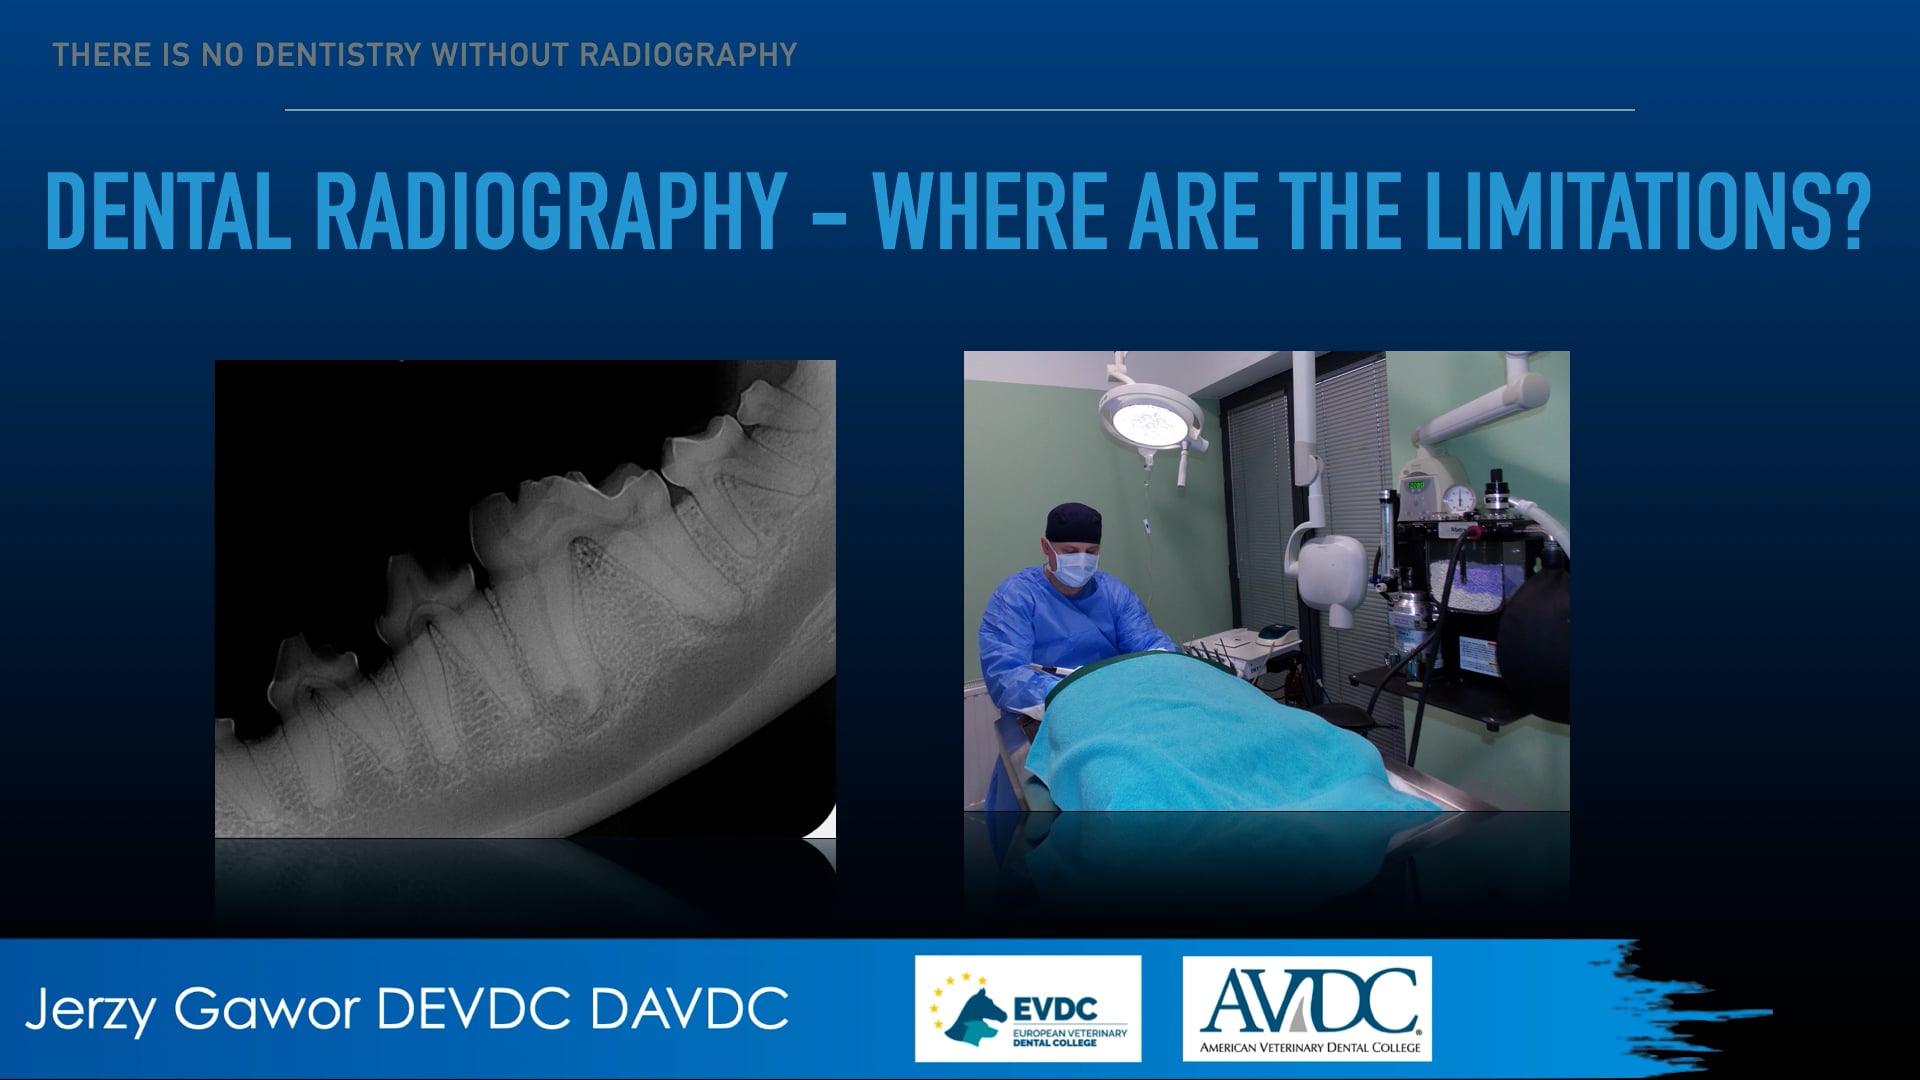 Dental radiography - where are the limitations?